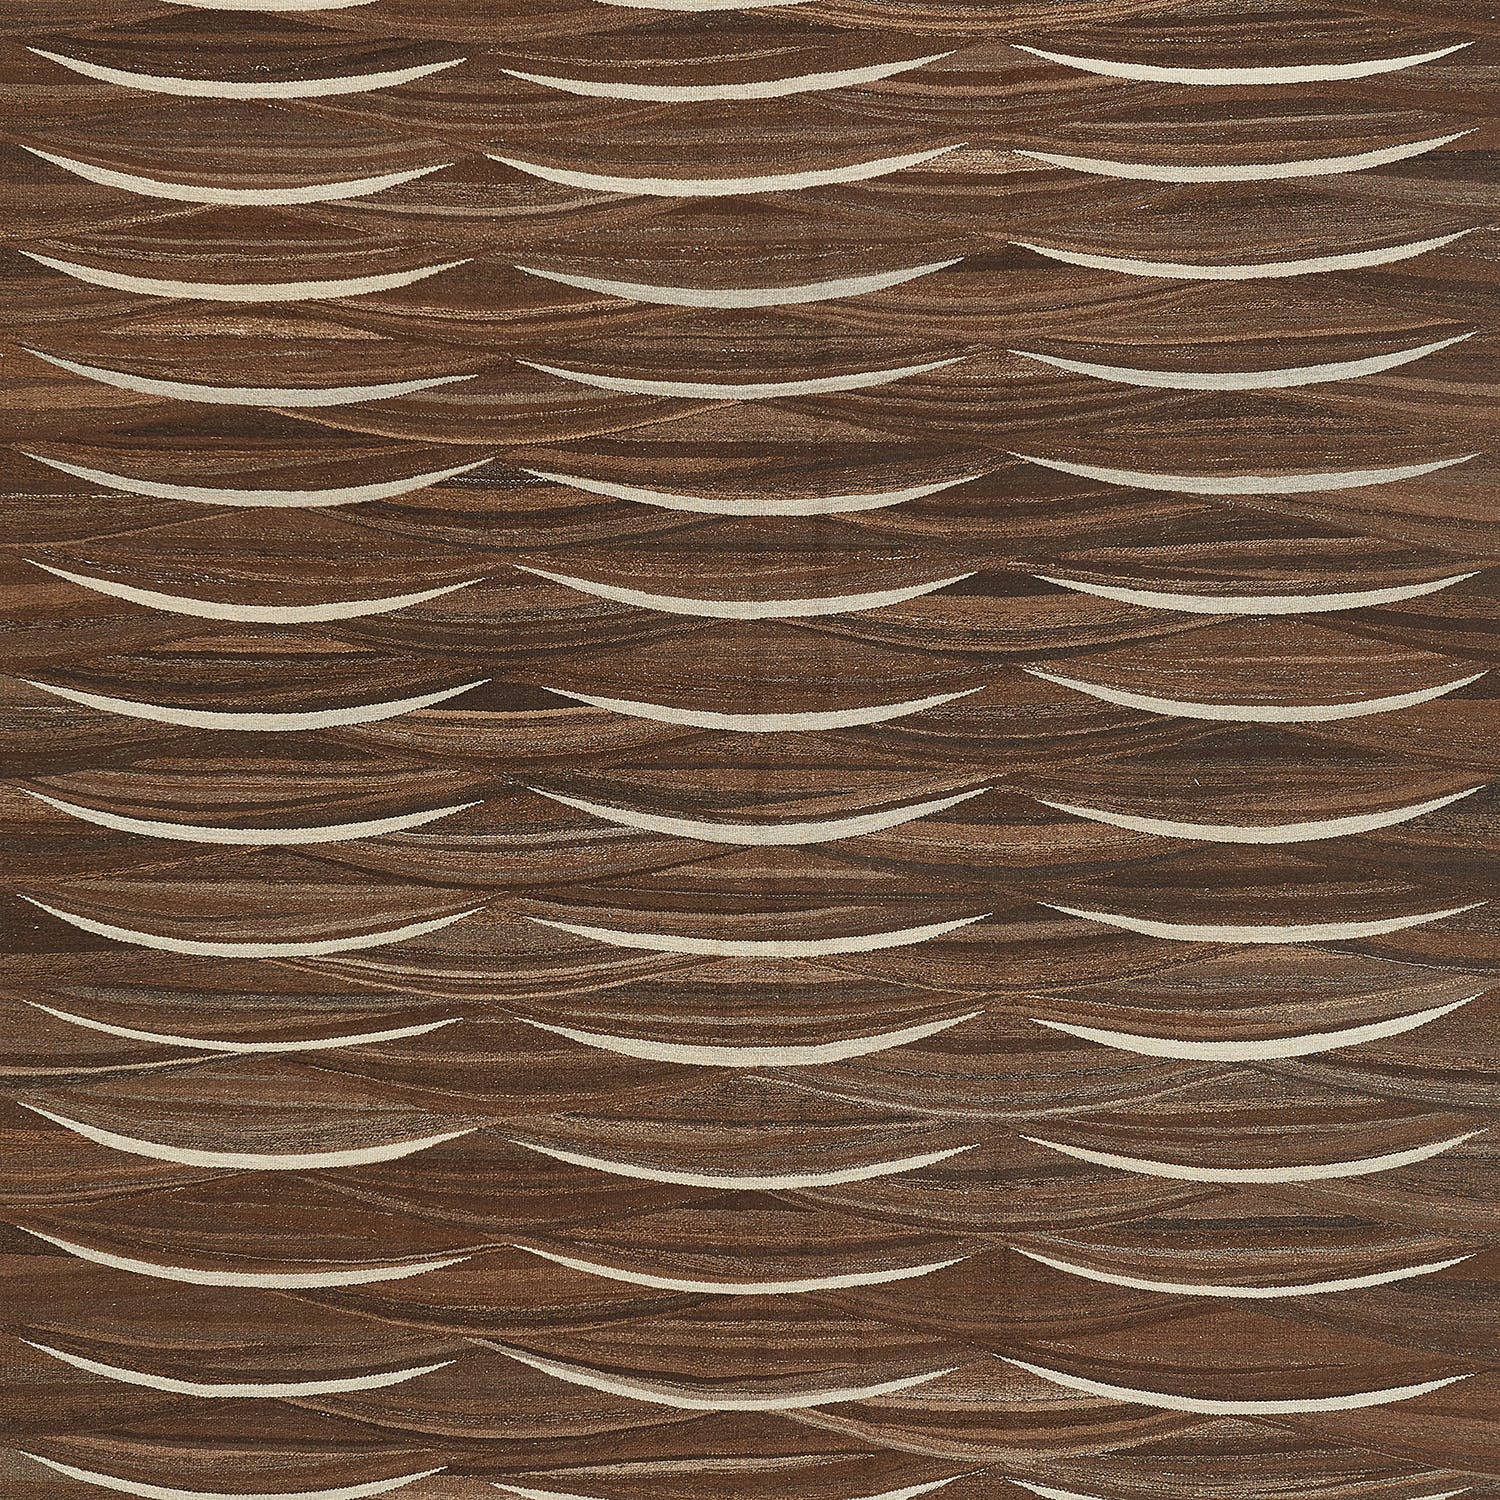 Patterned wooden surface with wavy bands and crescent-shaped grooves.